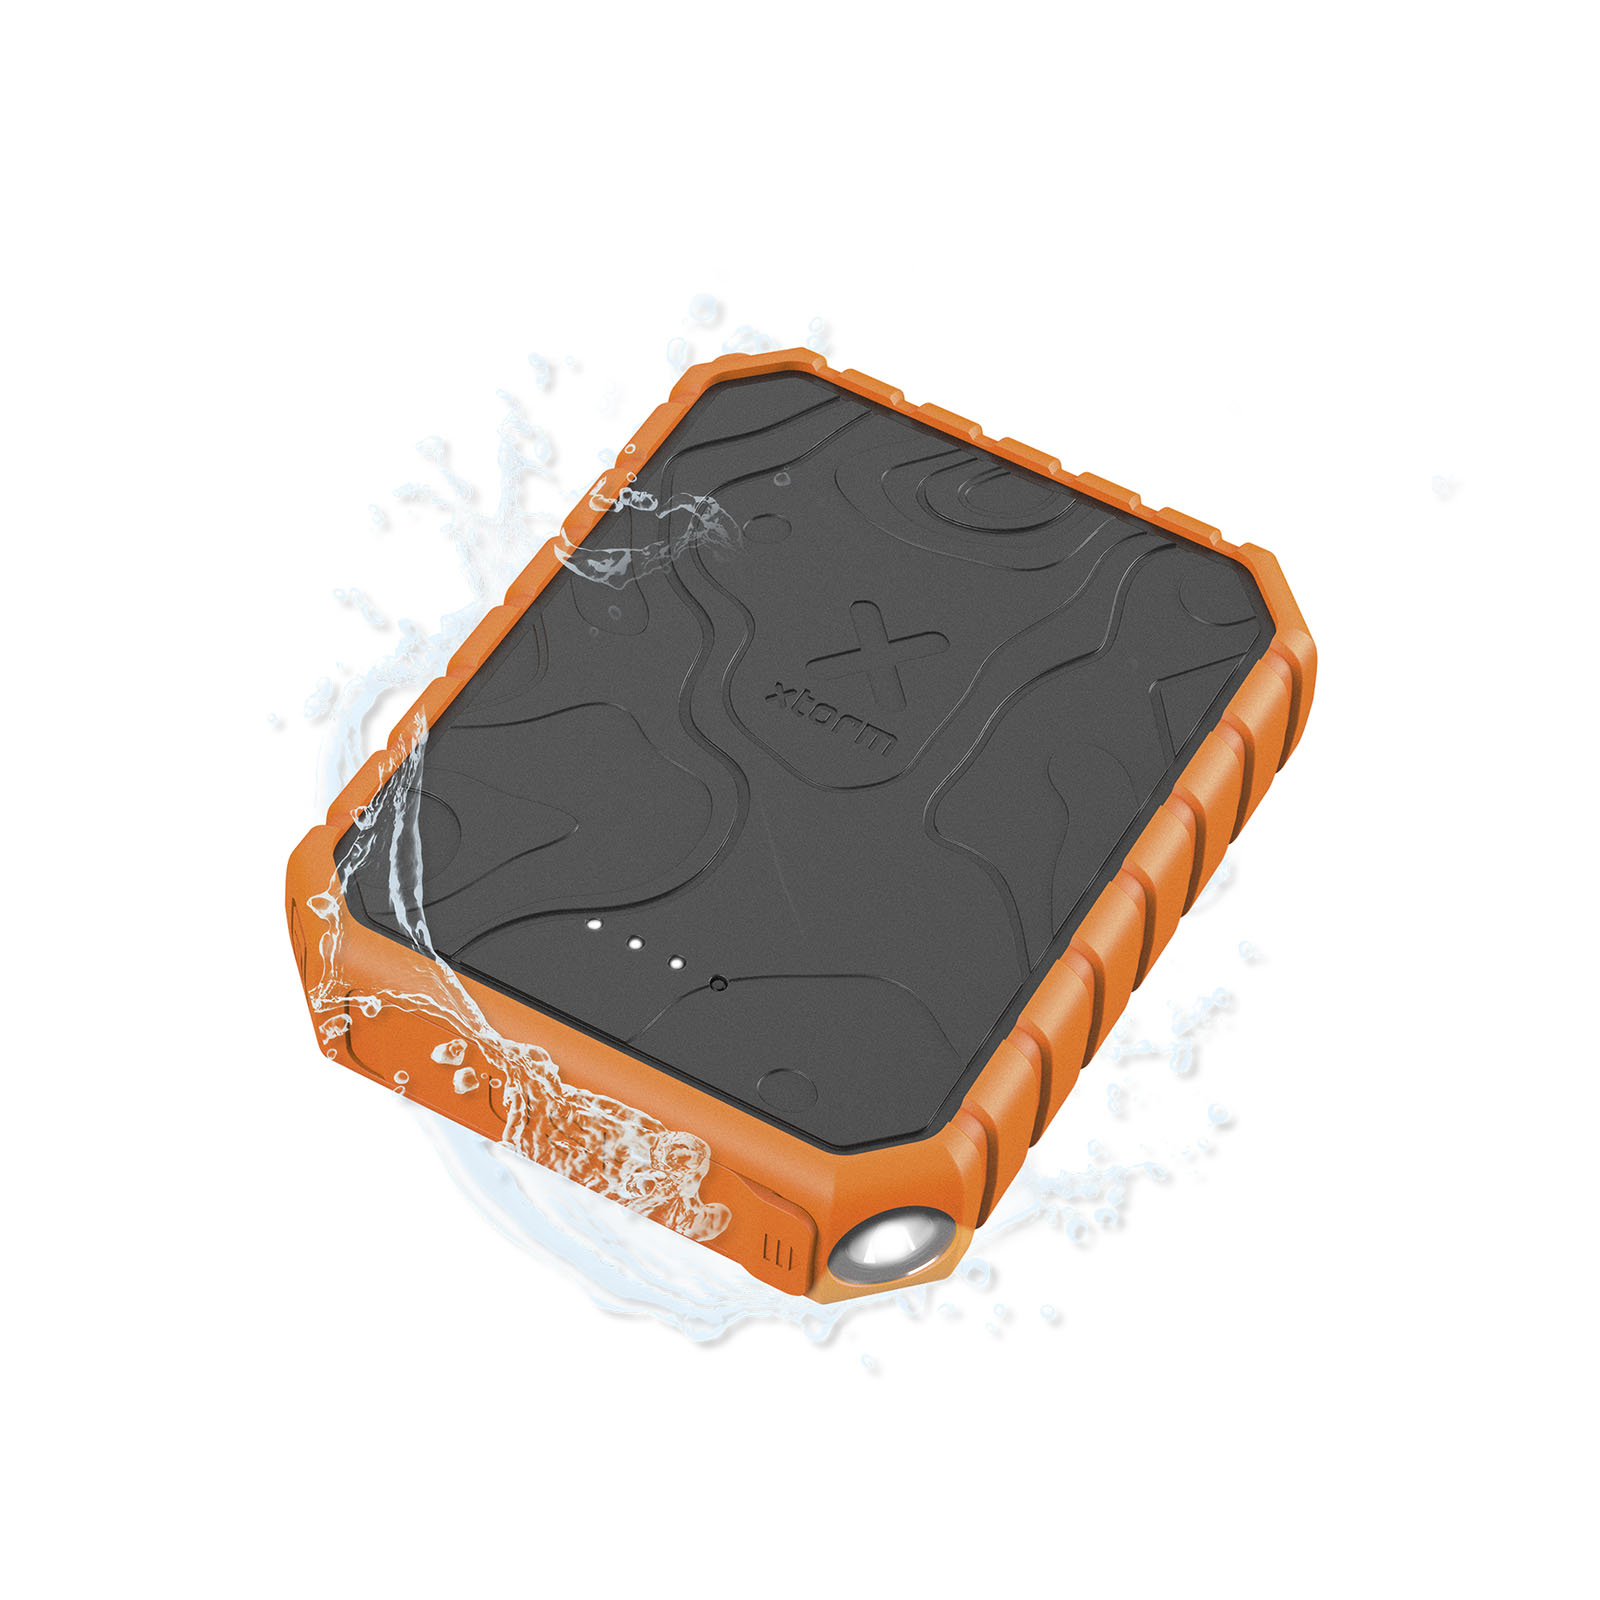 Advertising Powerbanks - Xtorm XR201 Xtreme 10.000 mAh 20W QC3.0 waterproof rugged power bank with torch - 5